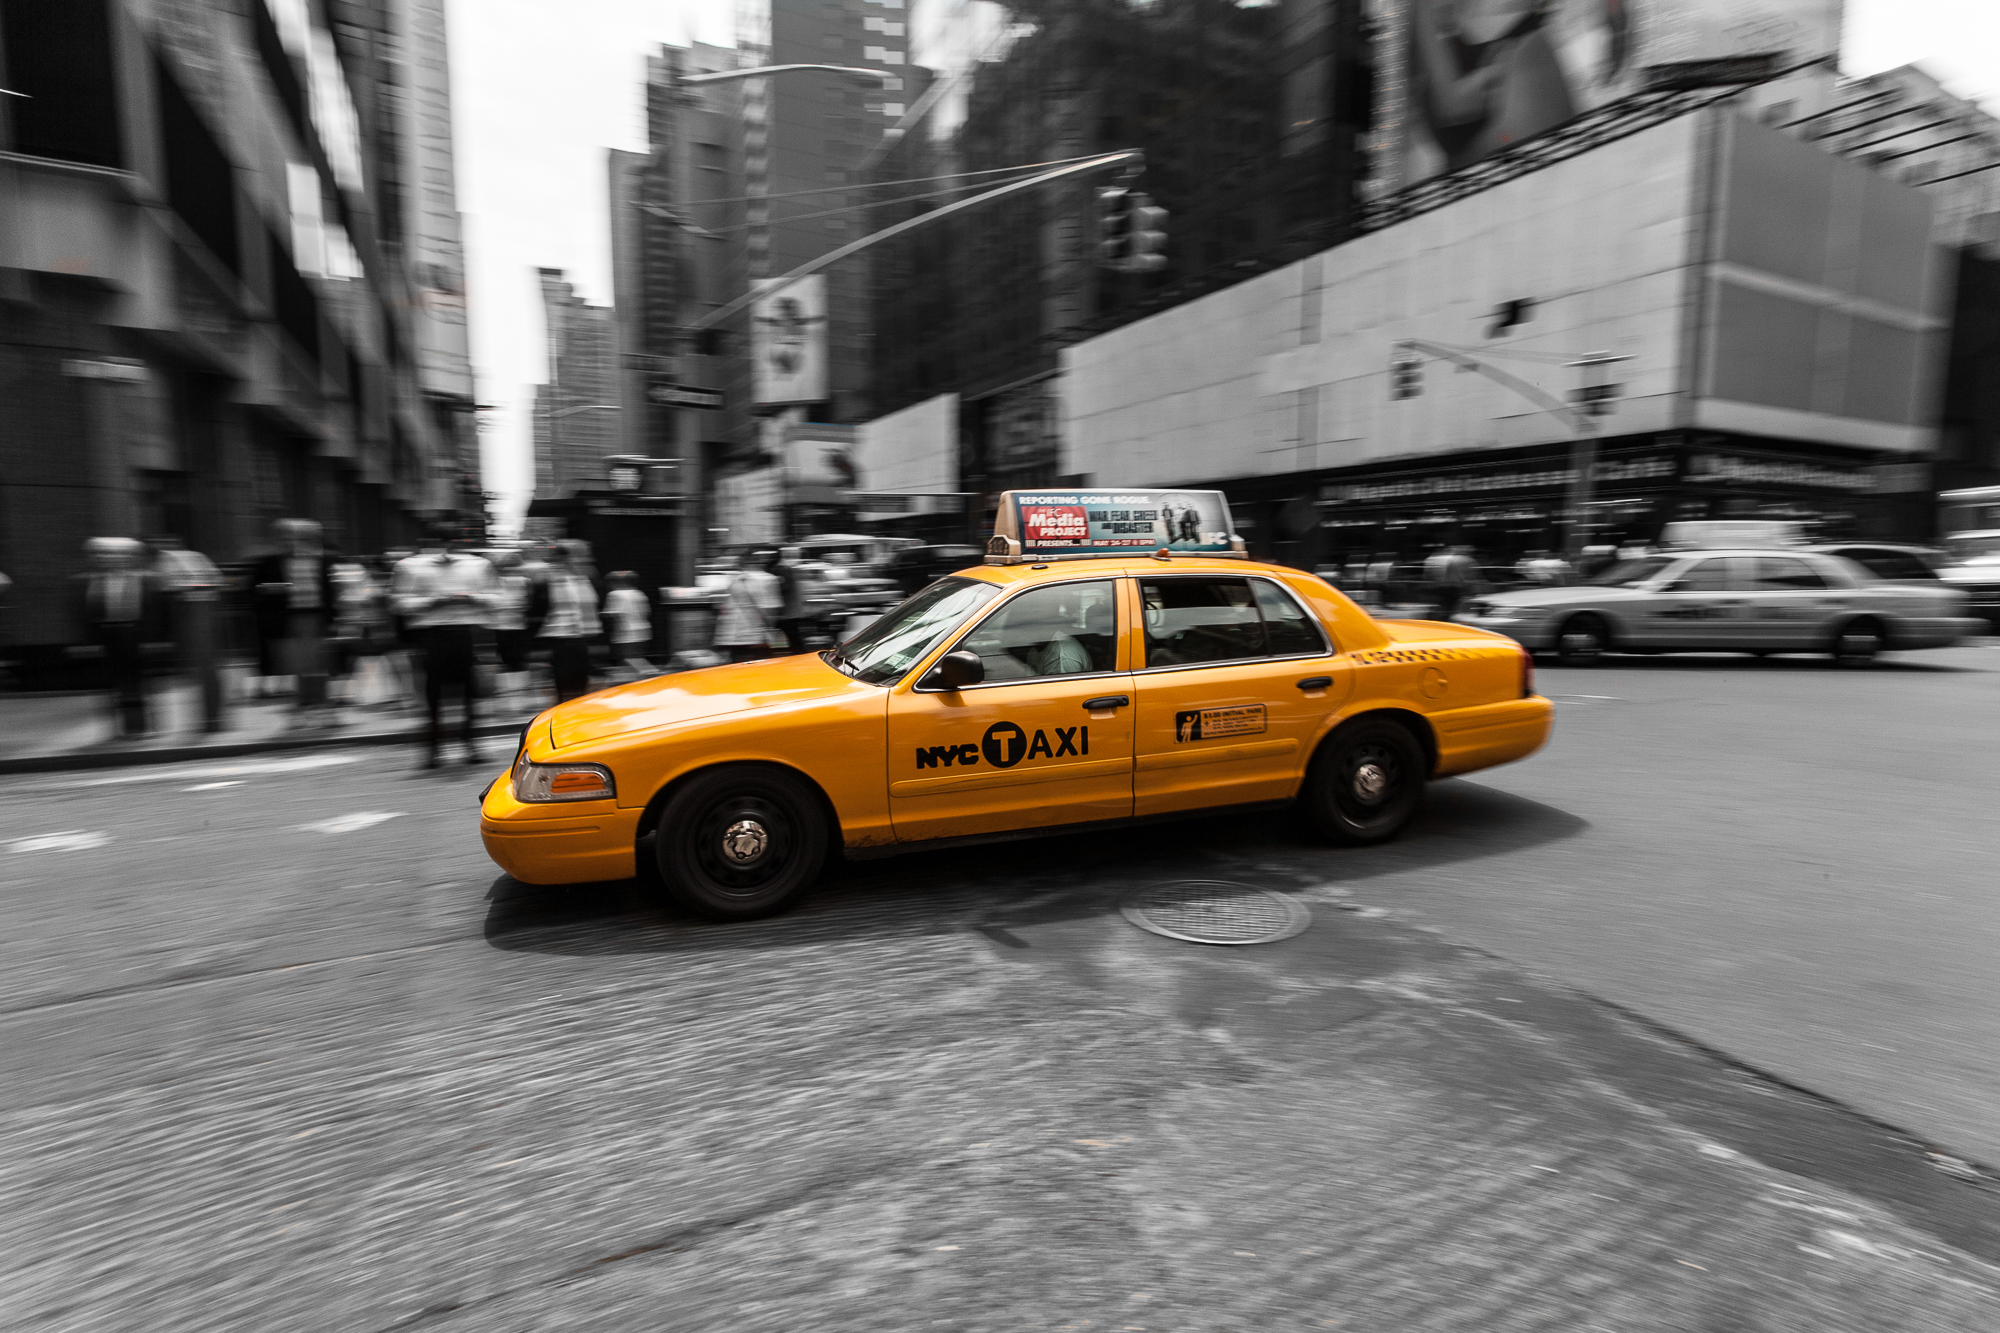 a yellow taxi cab with a sign on the front